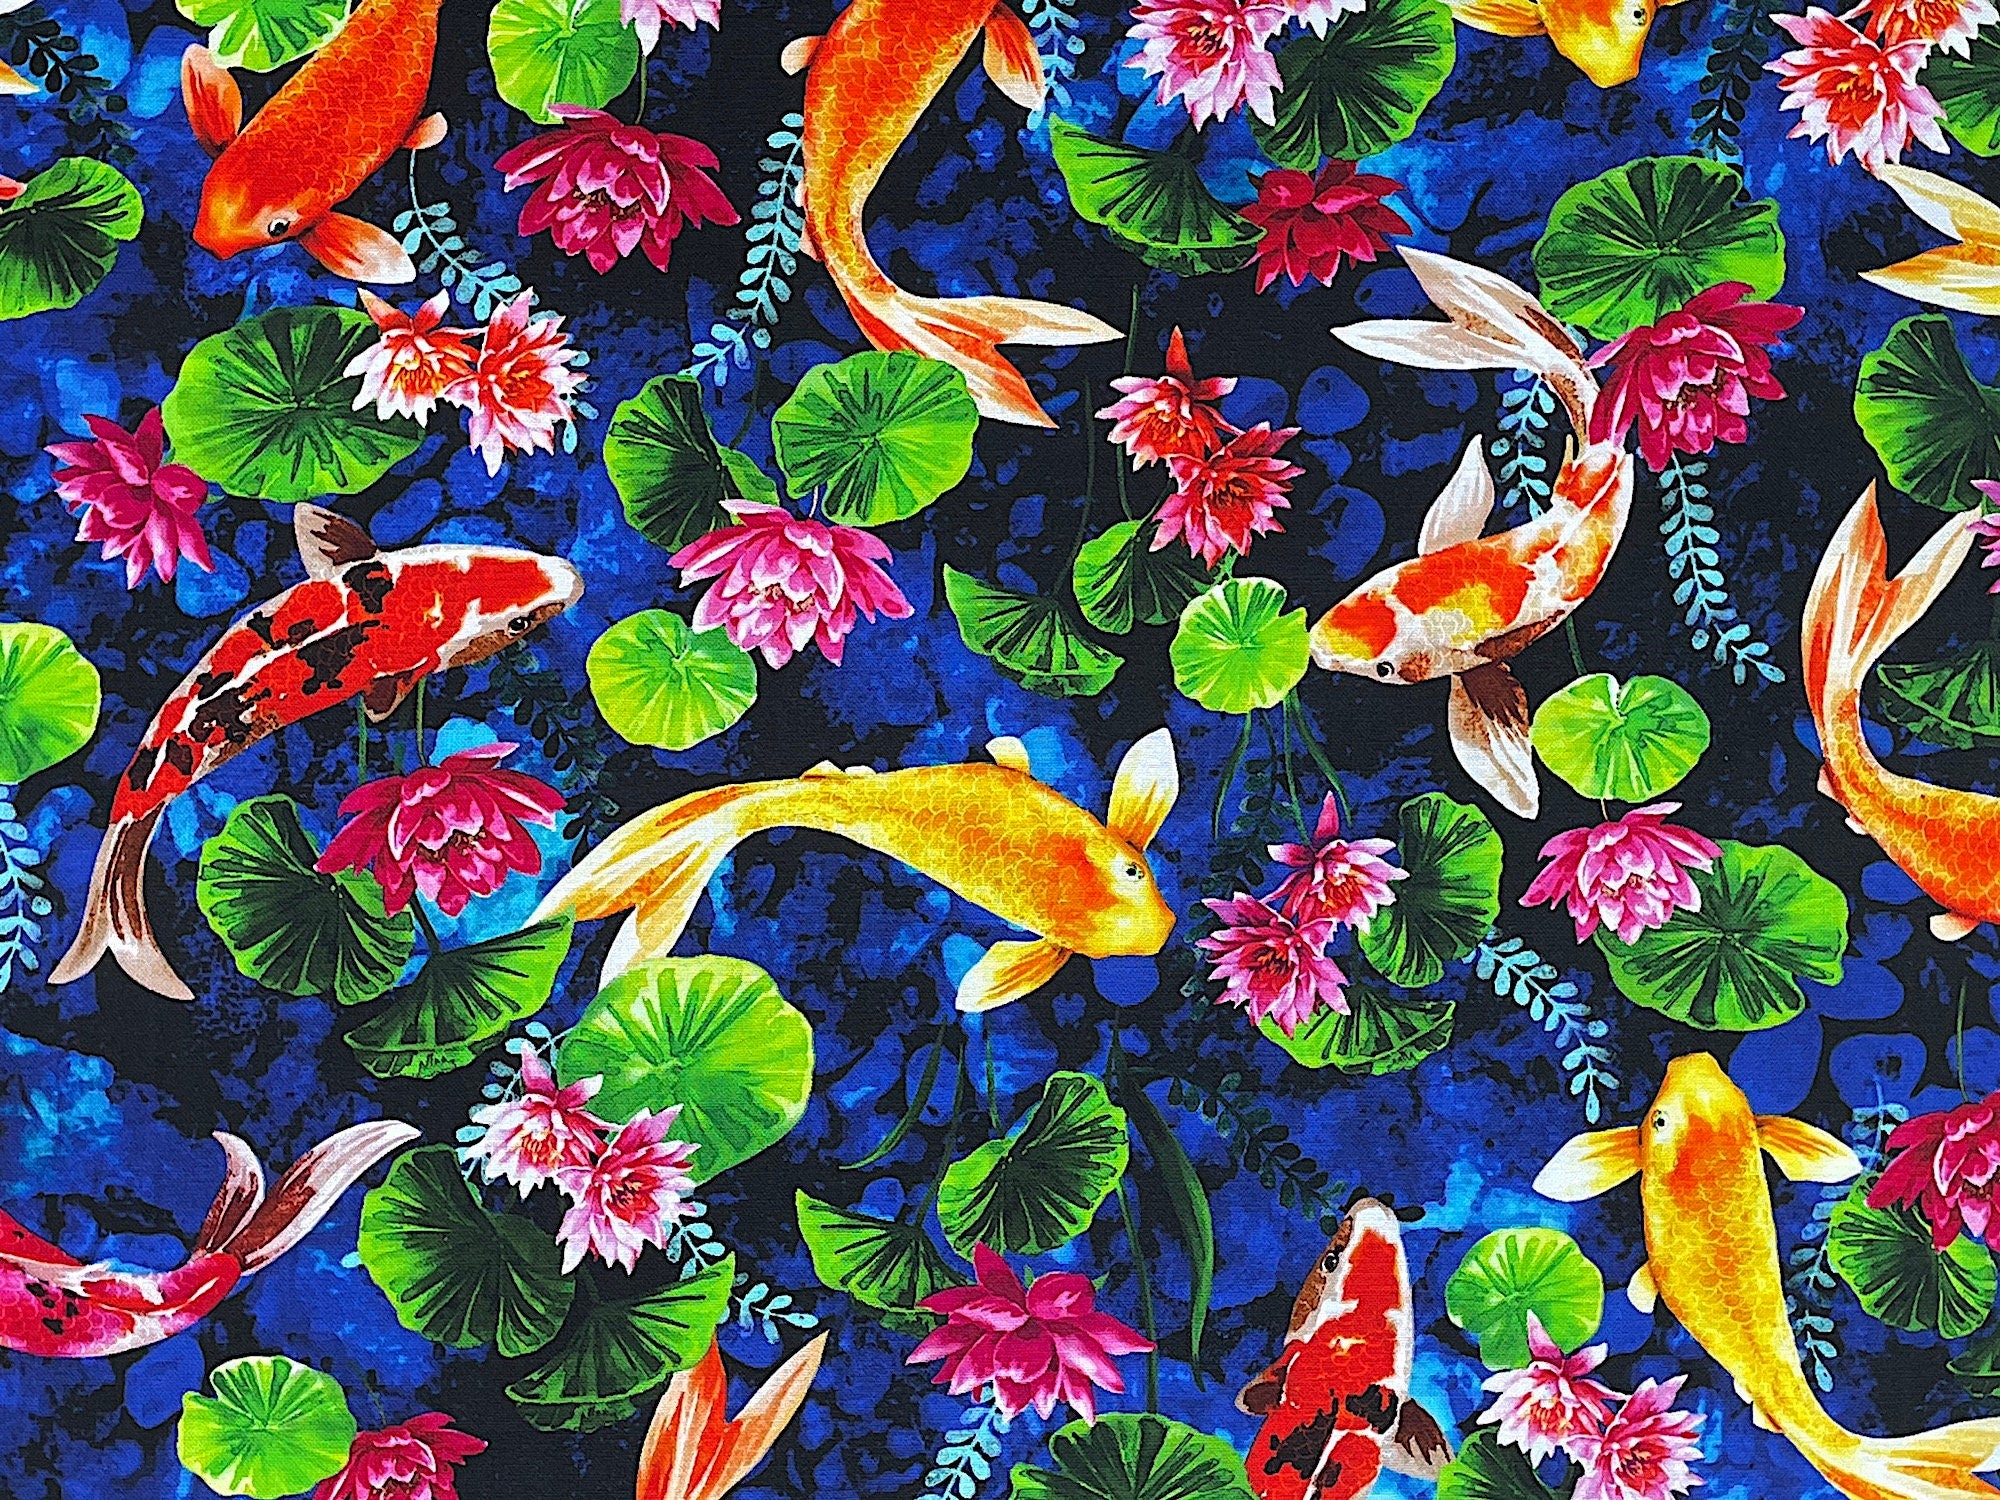 This cotton fabric is covered with orange, yellow and multi colored koi fish. There are also water lilies, water lotus throughout the fabric. 